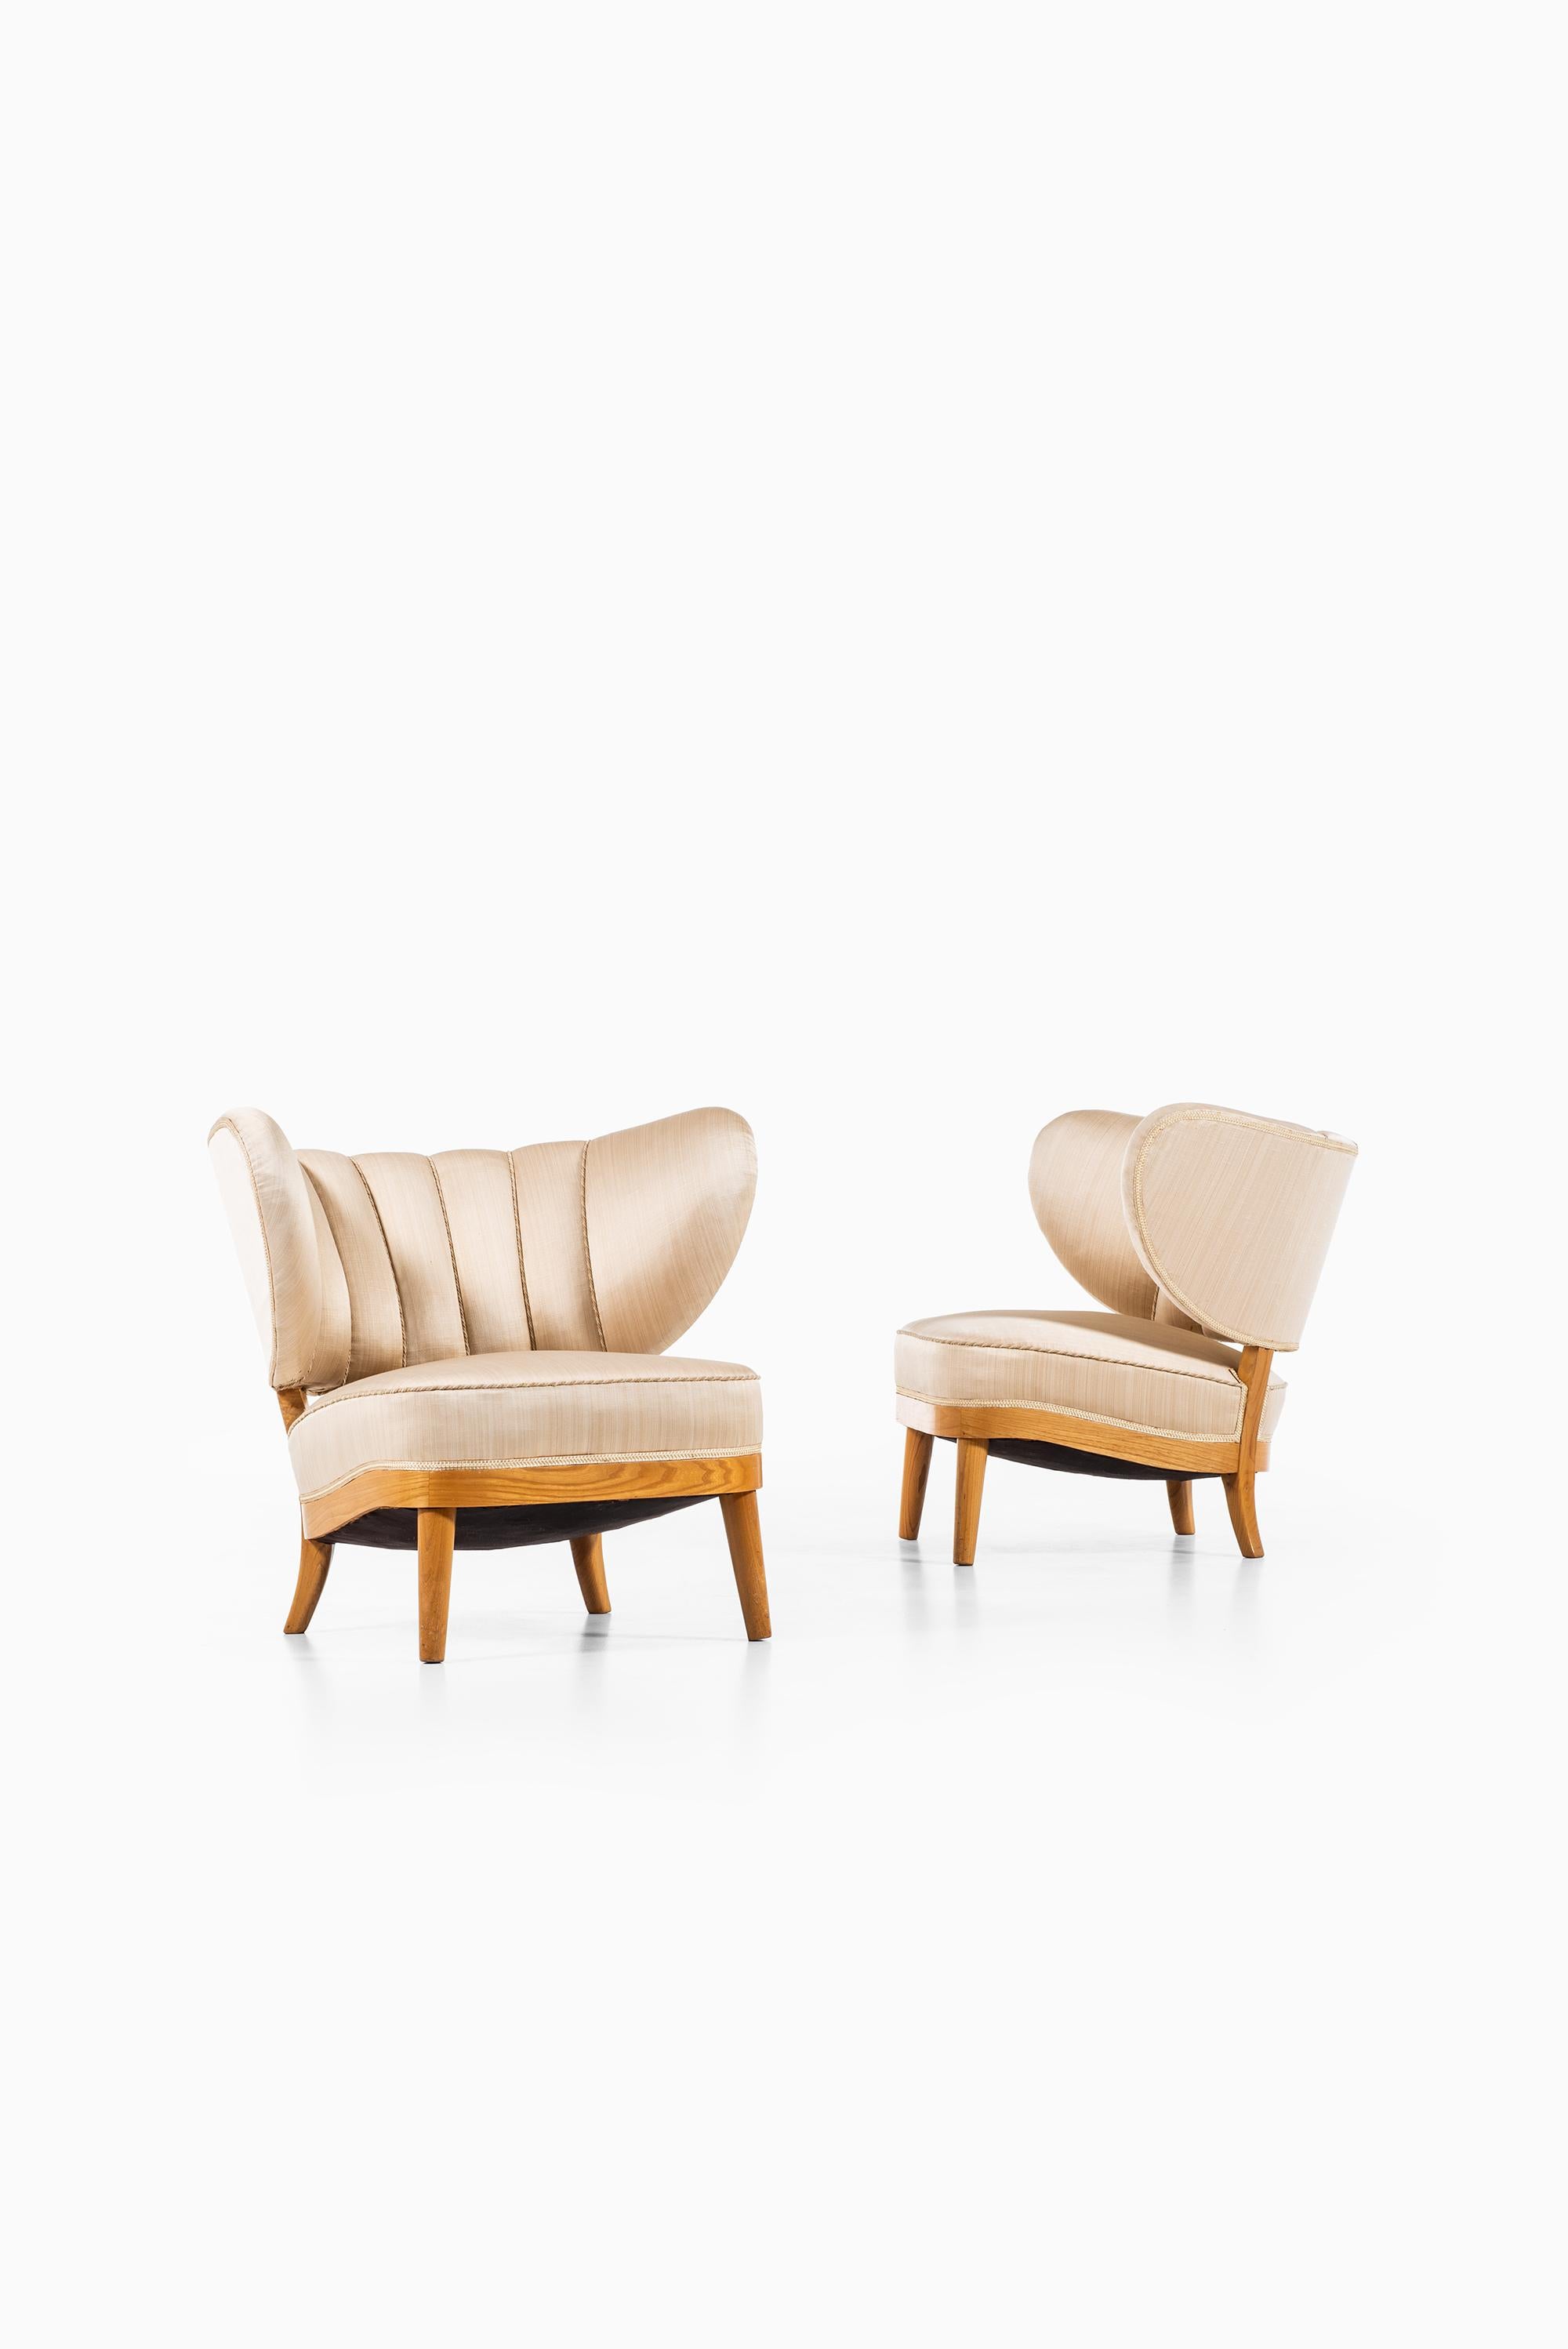 Otto Schulz Easy Chairs Produced by Boet in Sweden 1